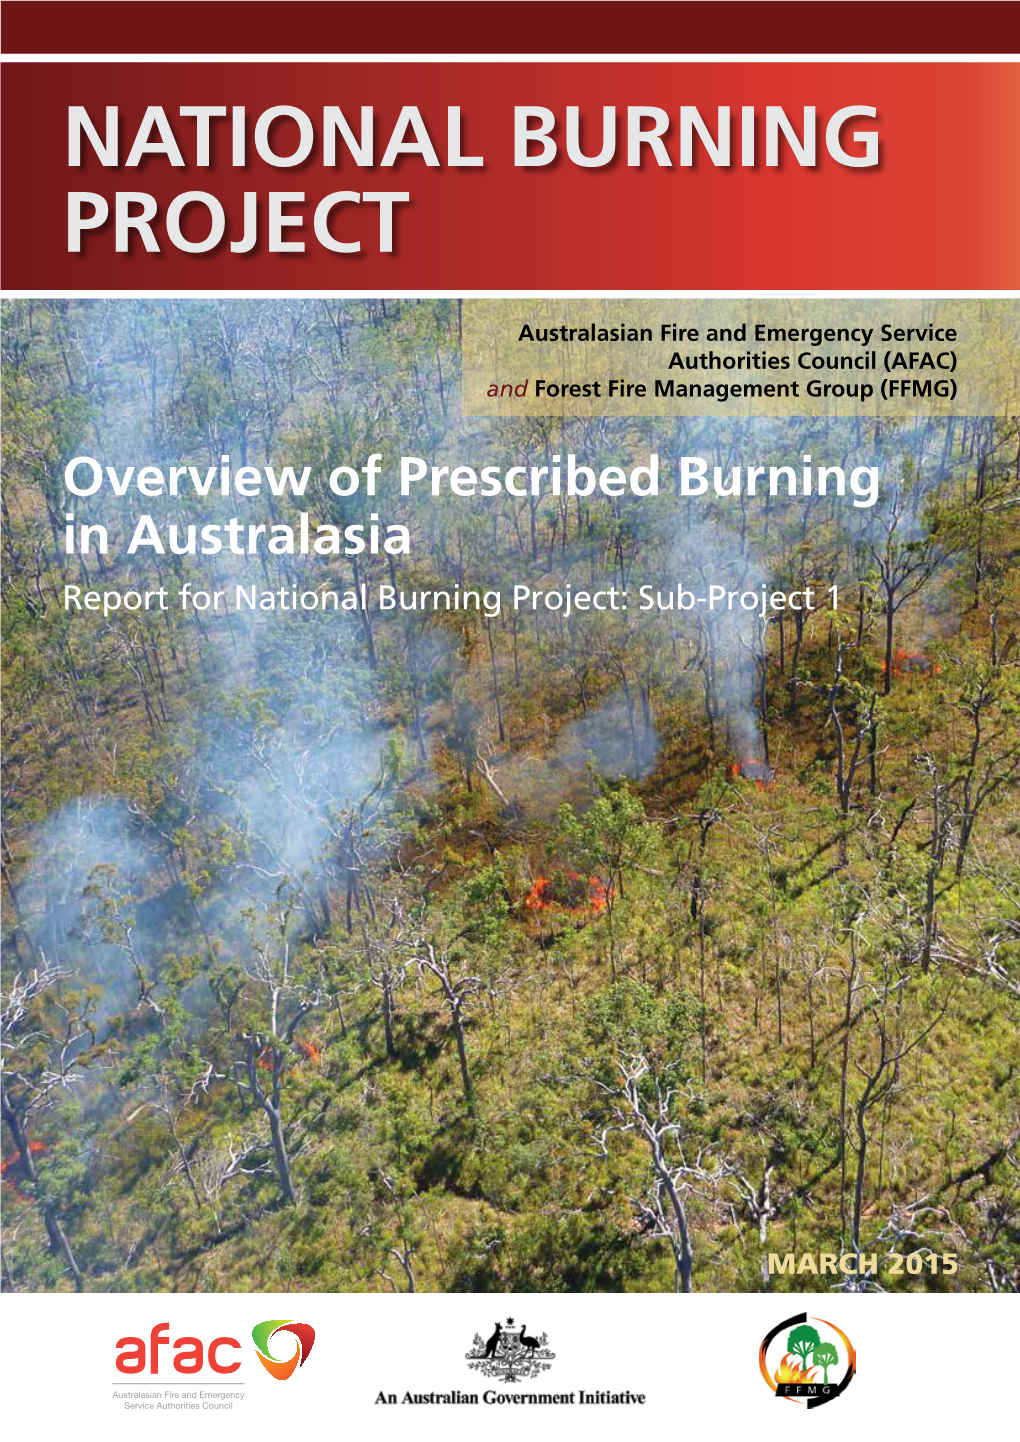 Overview of Prescribed Burning in Australasia Report for National Burning Project: Sub-Project 1